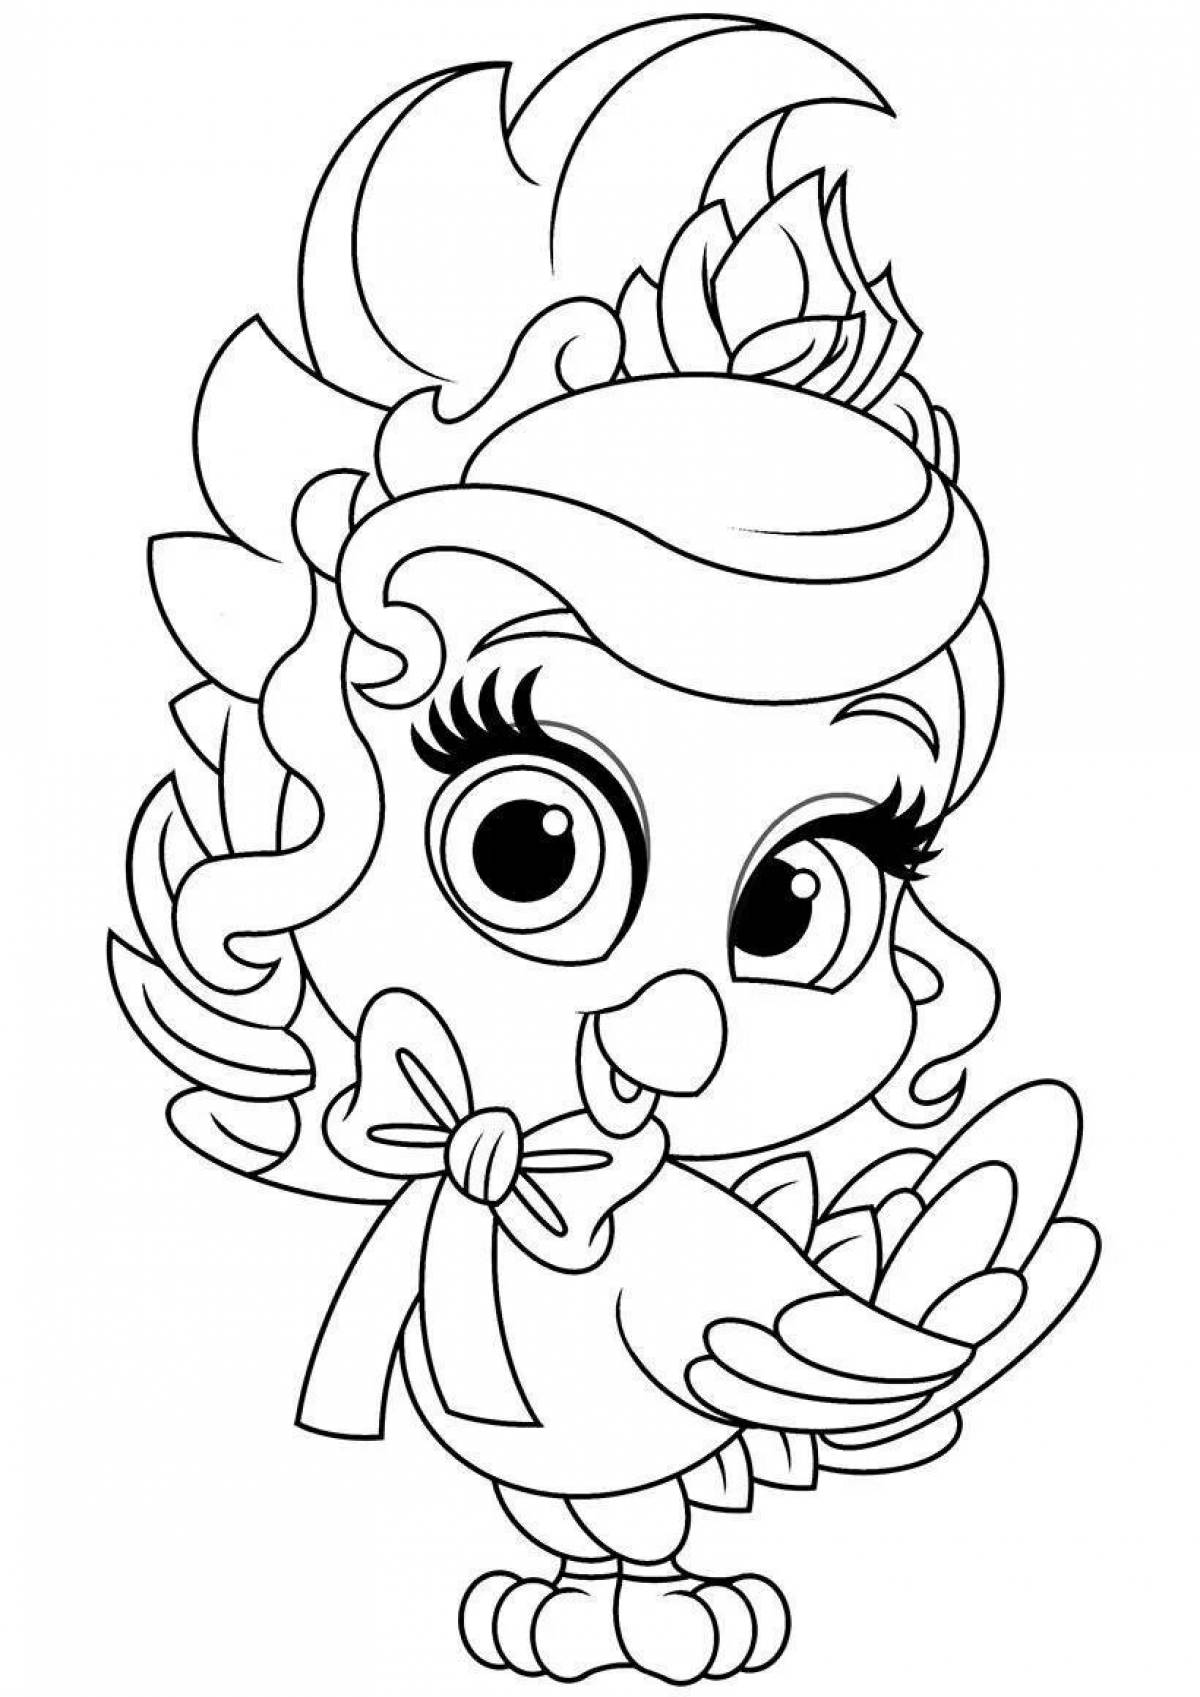 Awesome Disney pet coloring pages